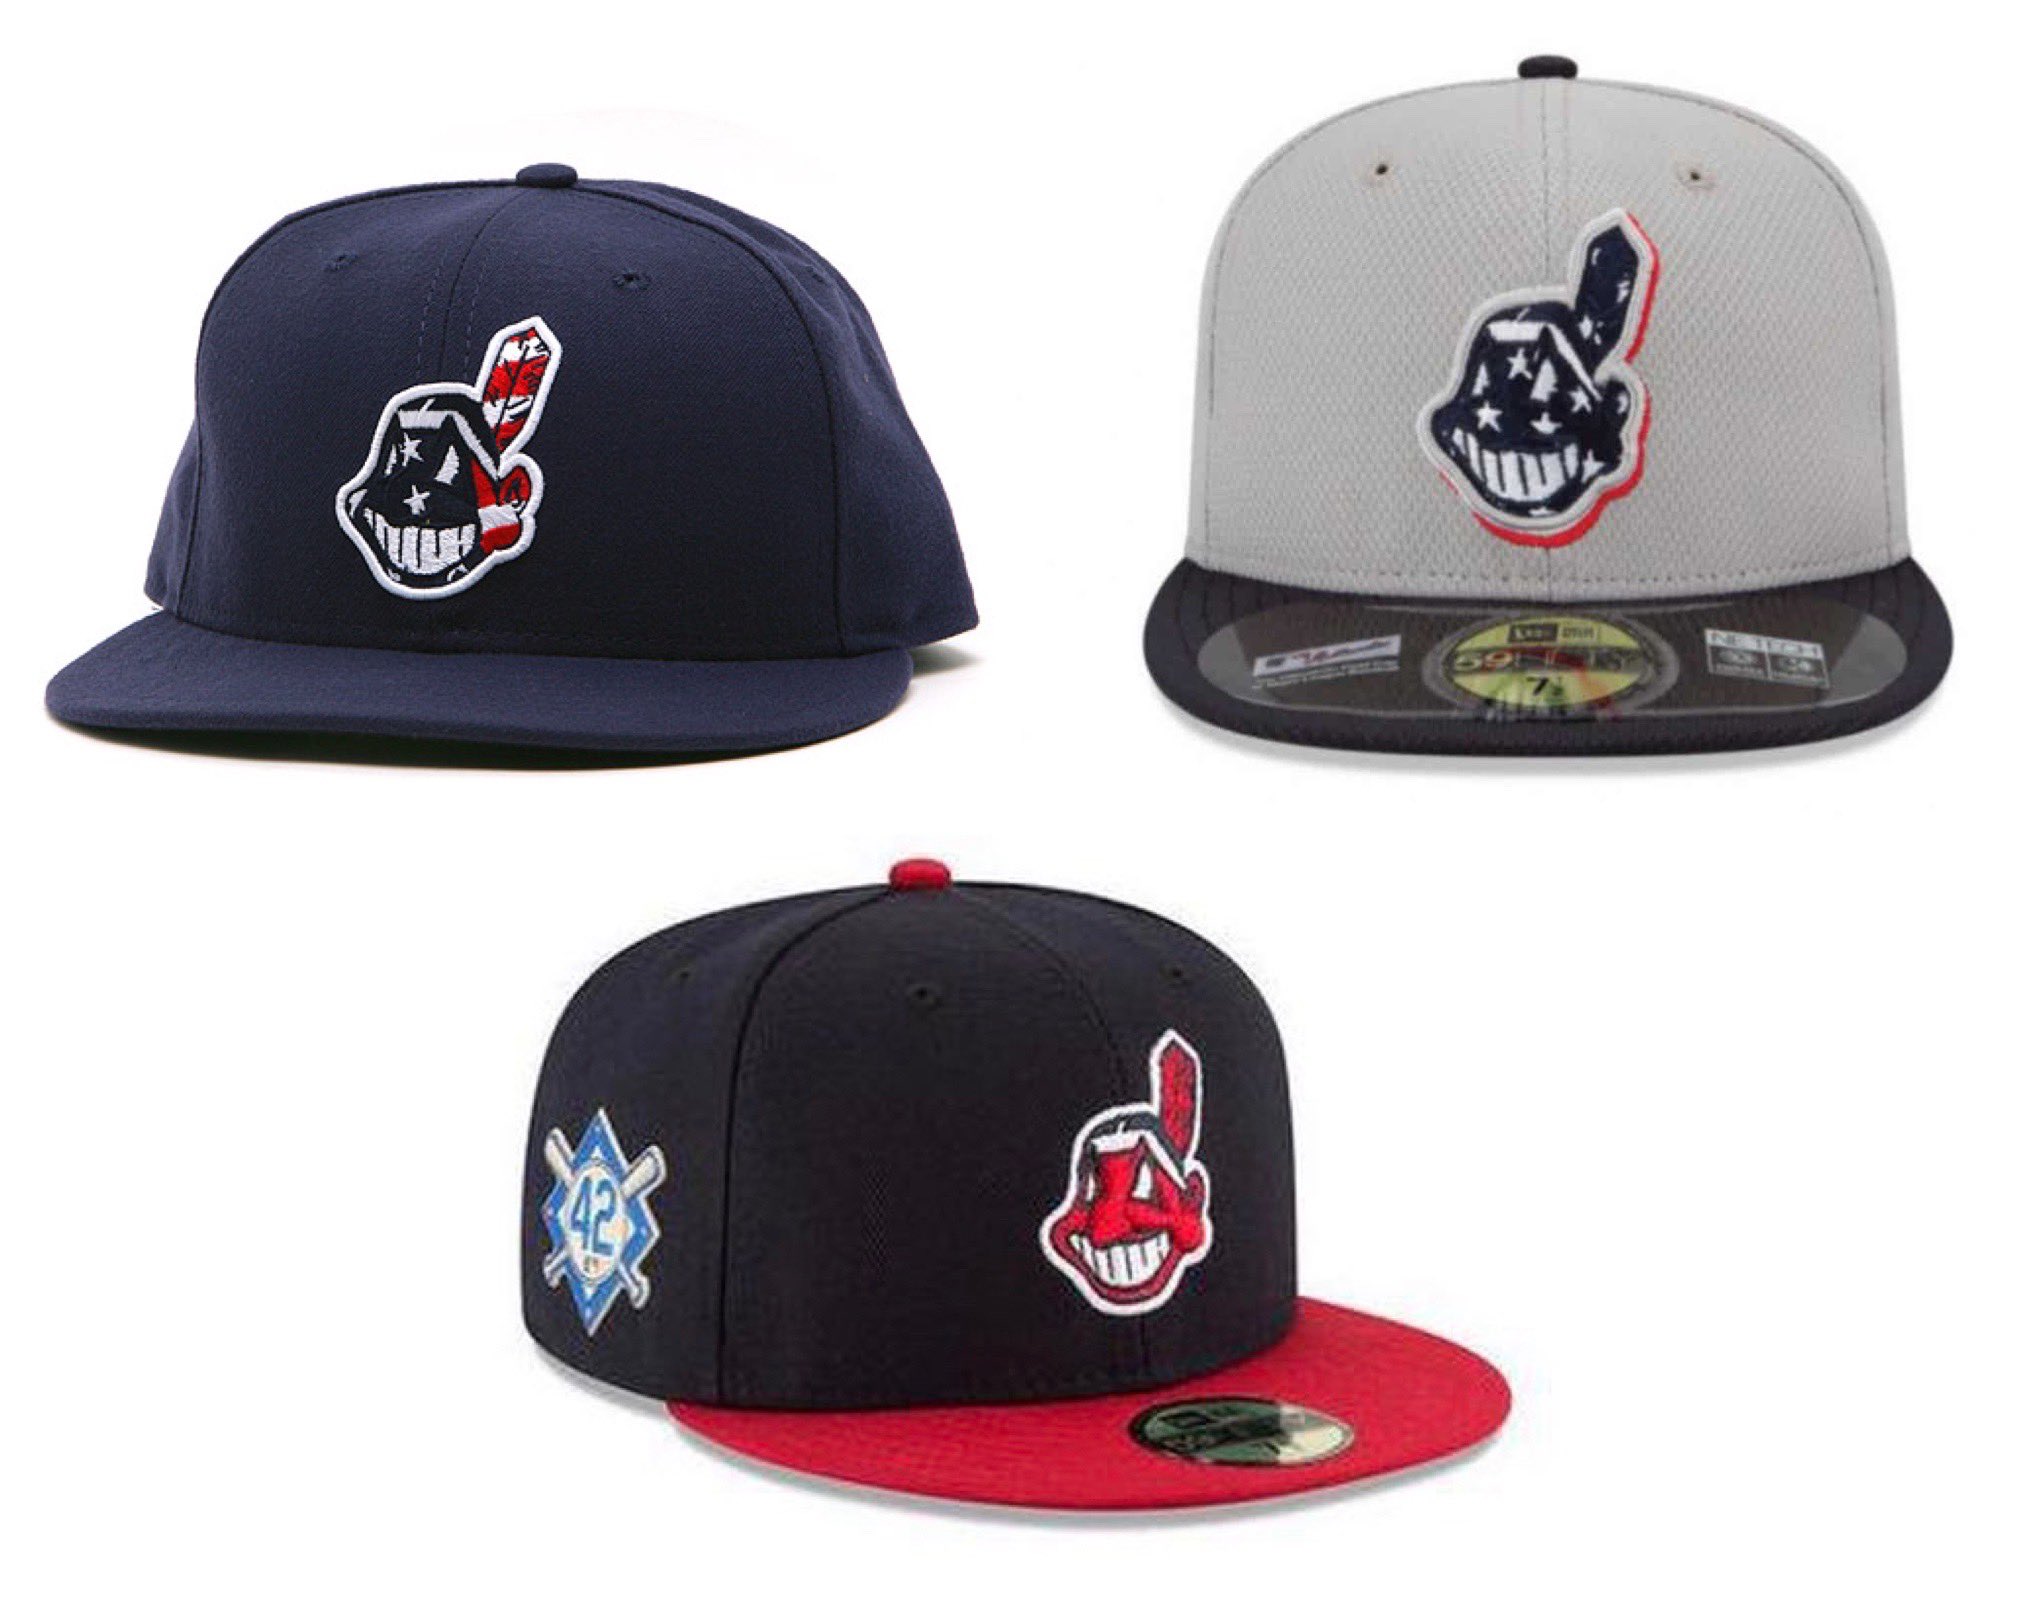 Chief Wahoo Jackie Robinson Indians hats being sold on